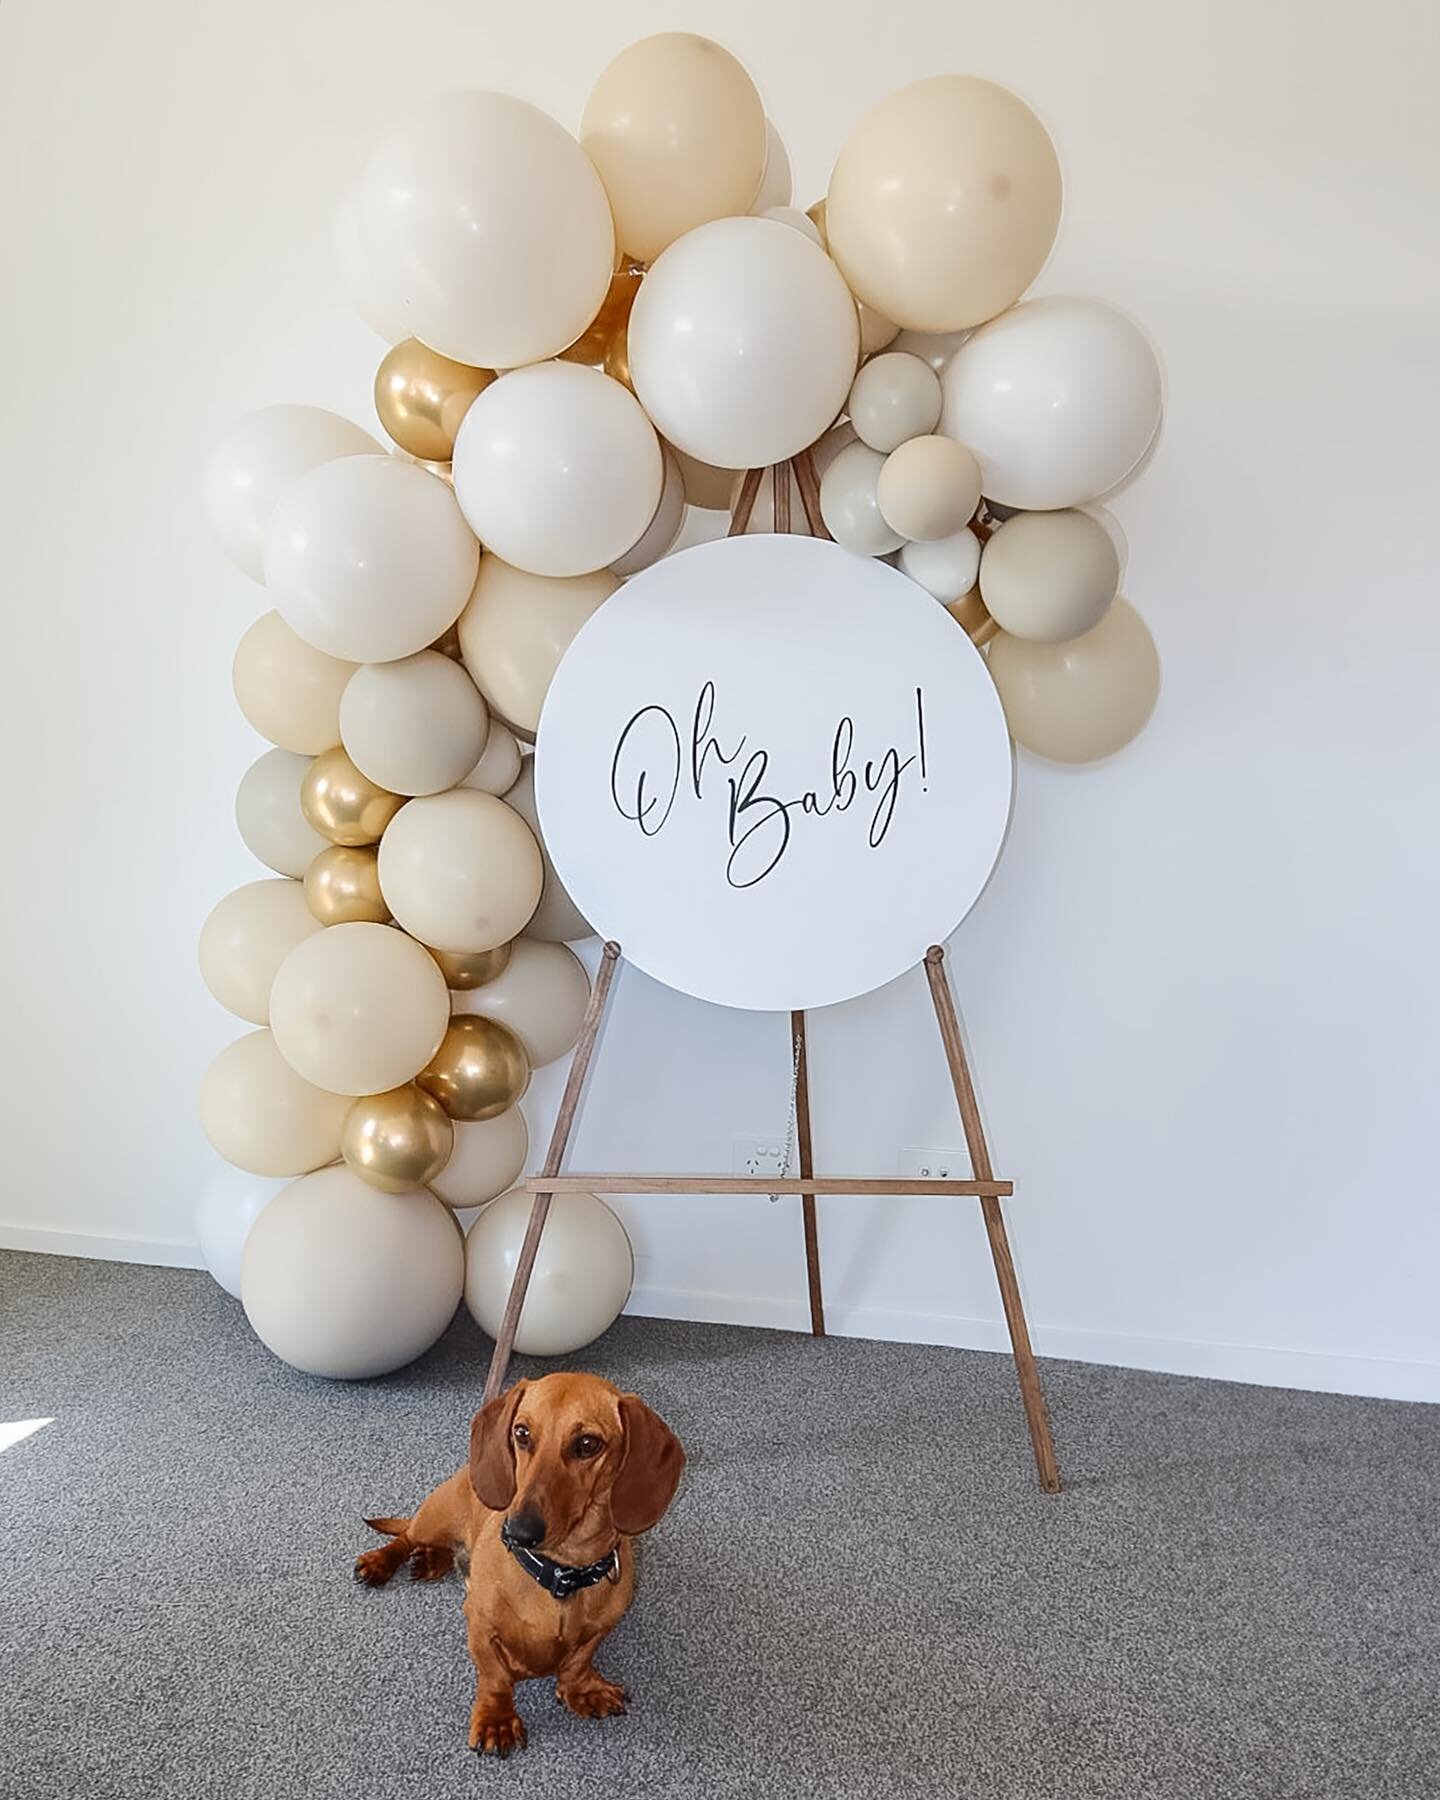 Cute photo back drop for the cutest baby shower guest 🎉